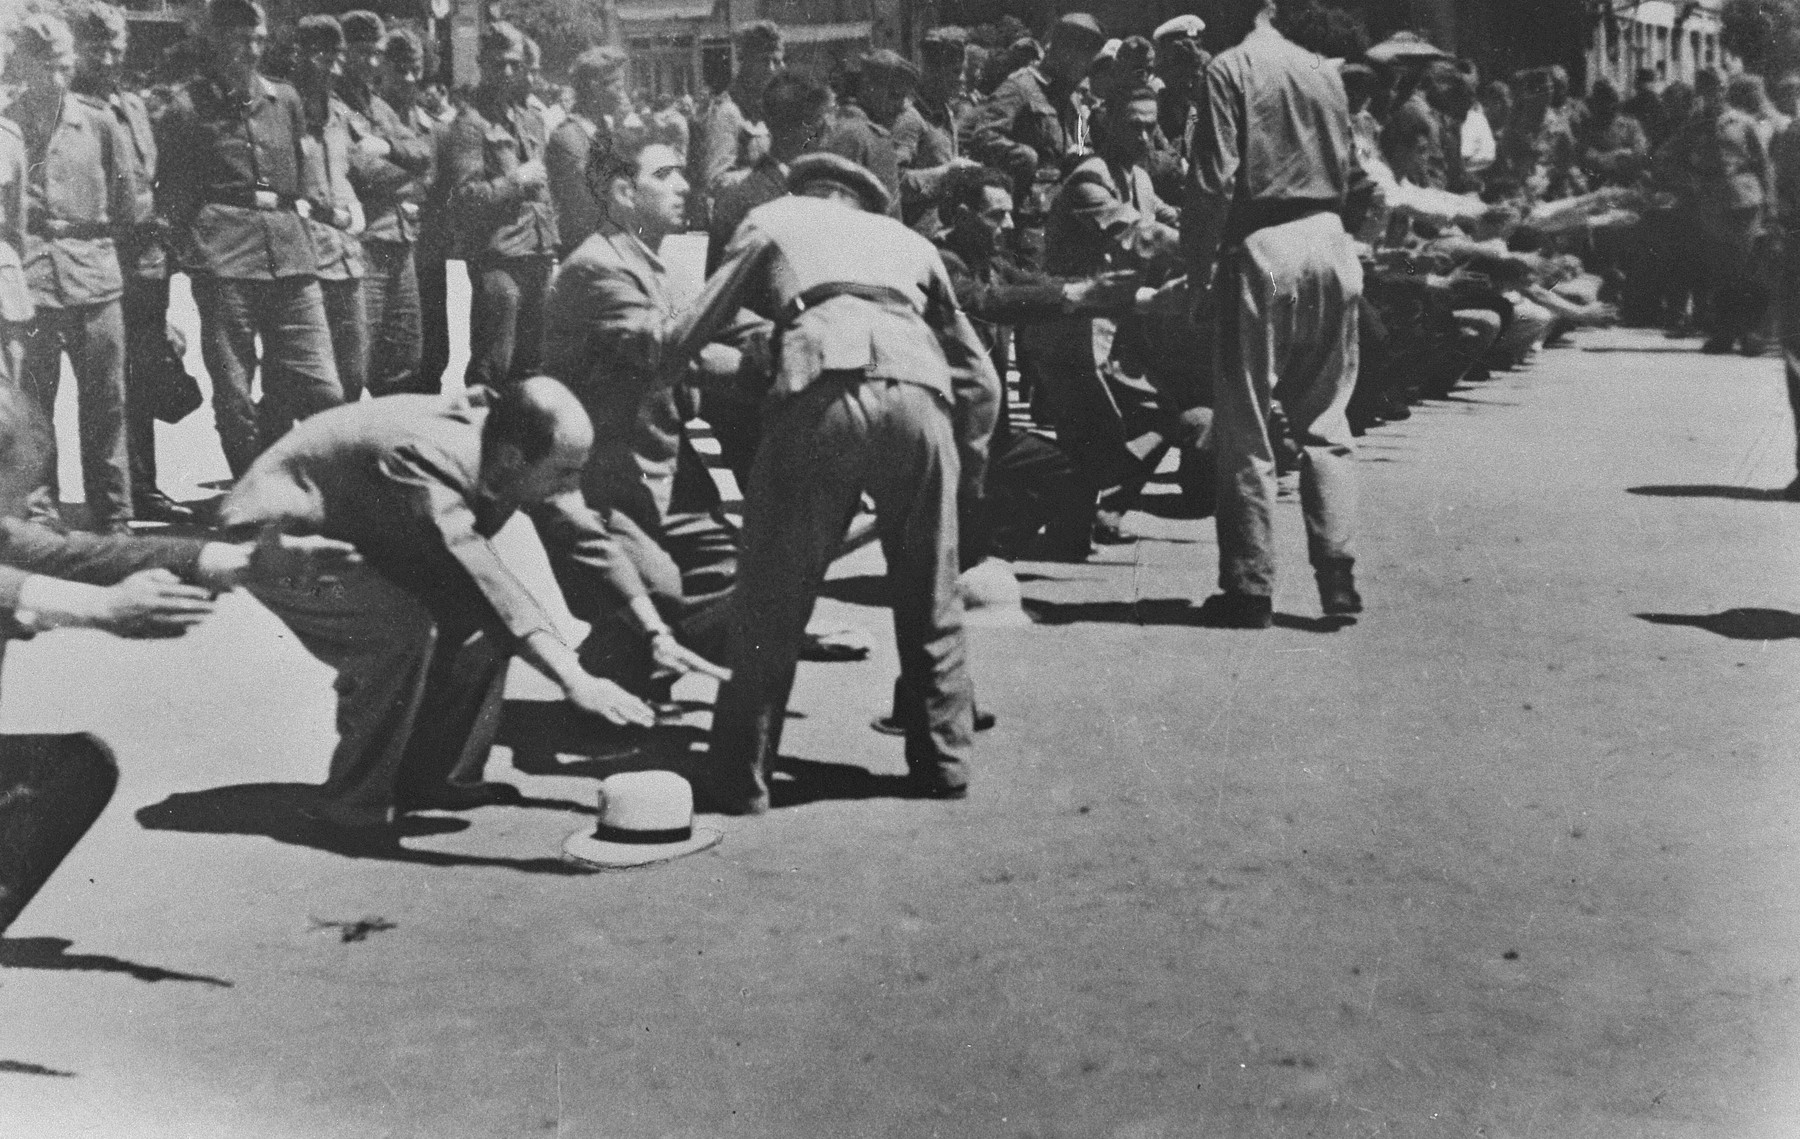 German soldiers force a group of Jews to perform calisthenics on Eleftheria (Freedom) Square in Salonika.